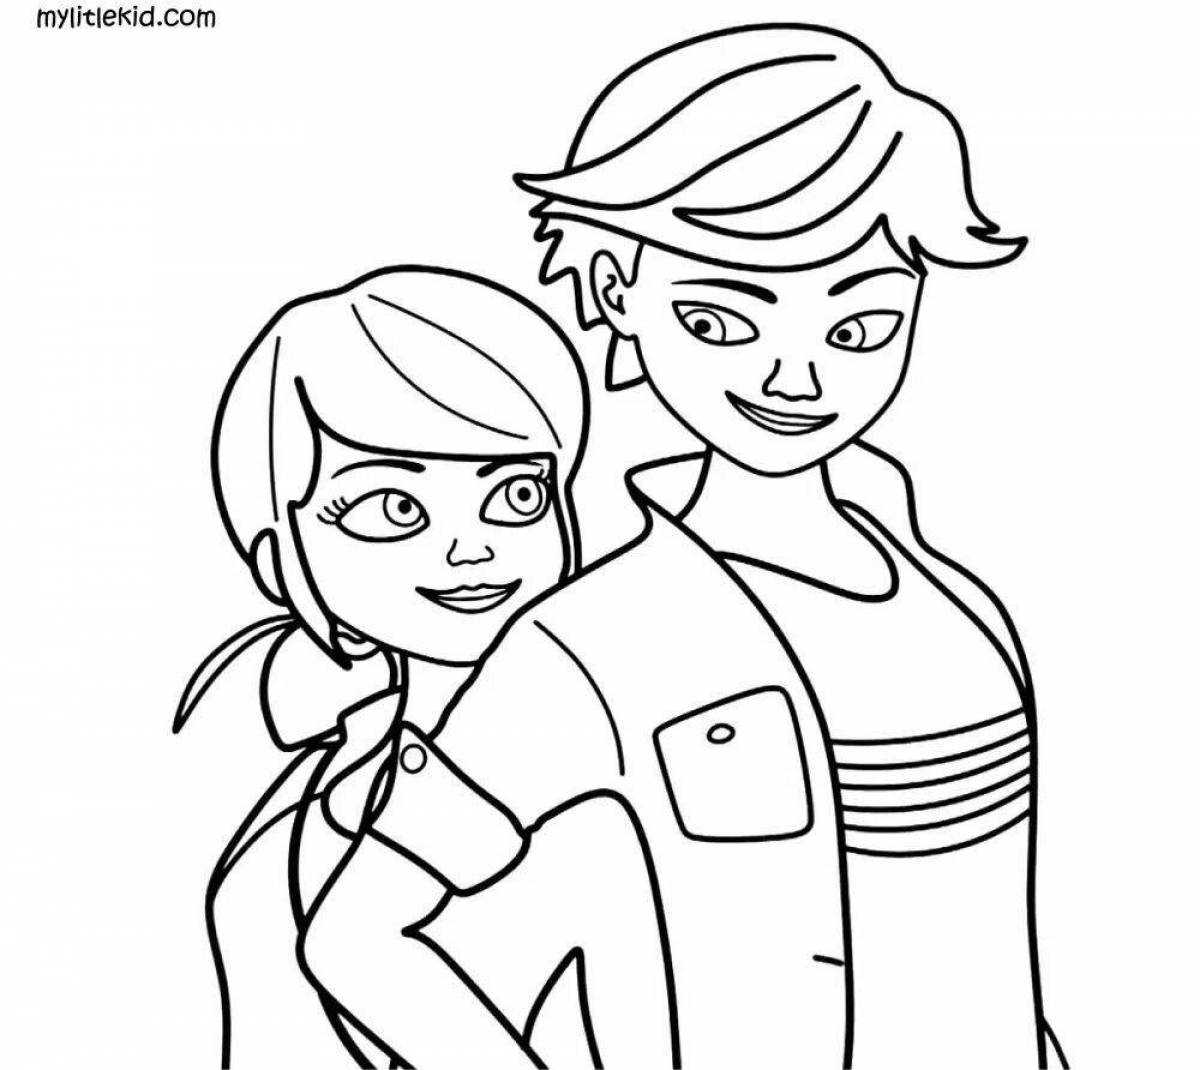 Marinette and Adrian's adorable coloring book